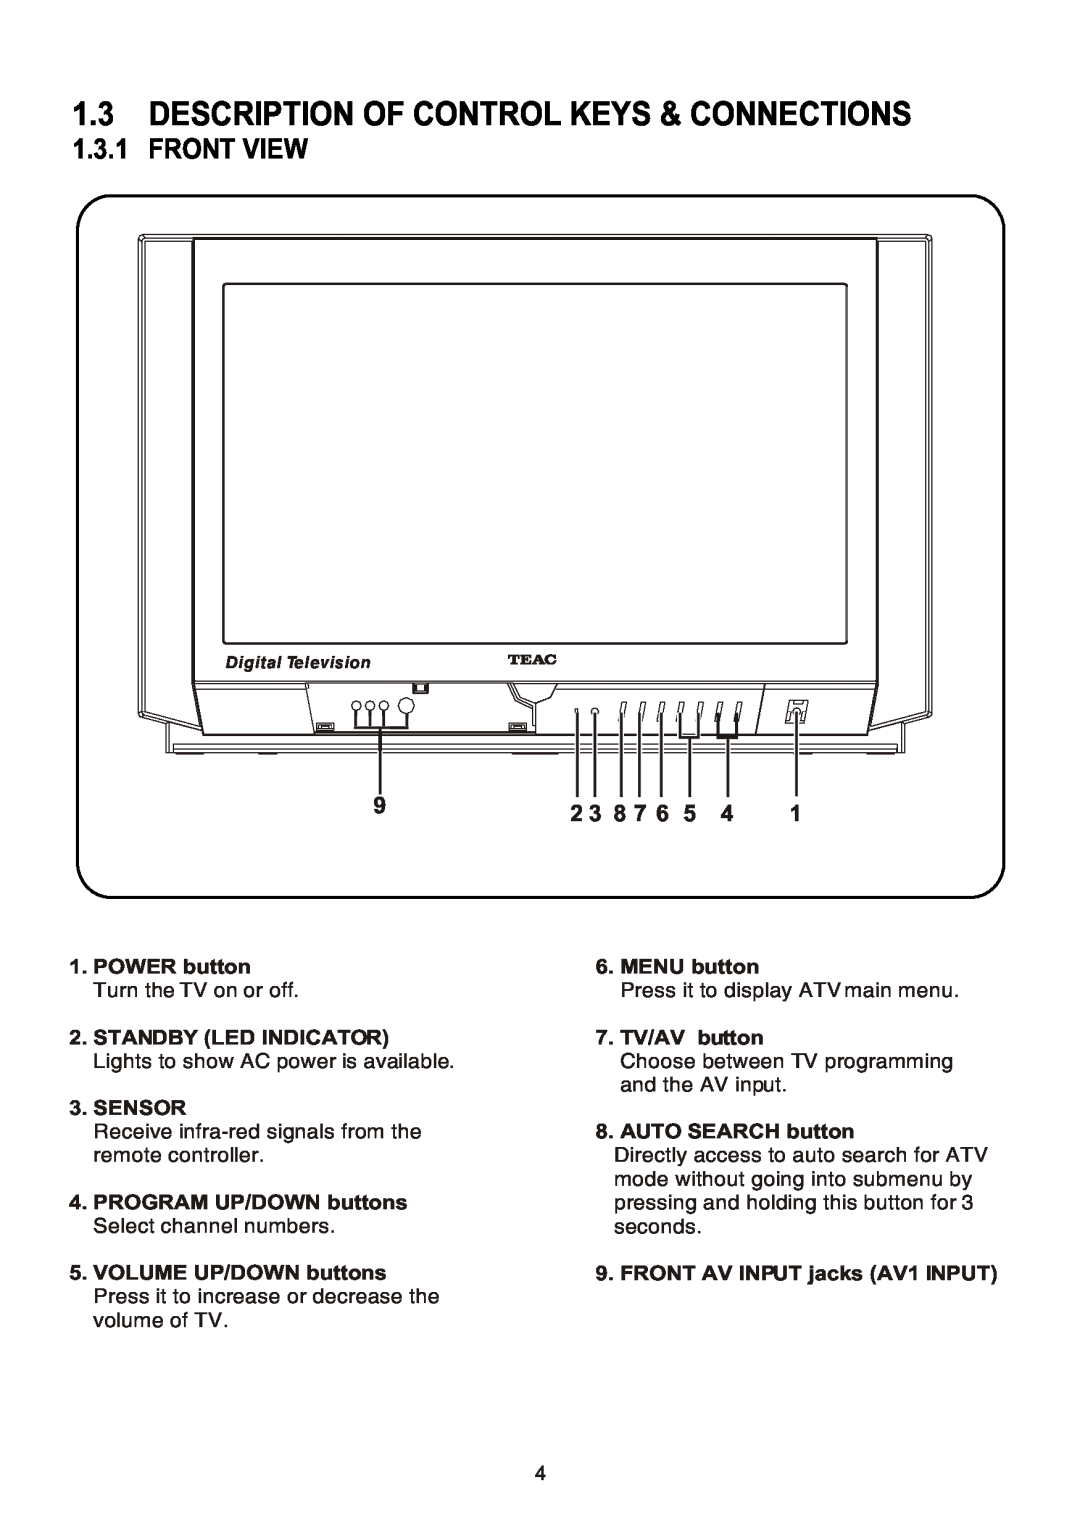 Teac CT-W32ID owner manual Description Of Control Keys & Connections, Front View, 2 3 8 7 